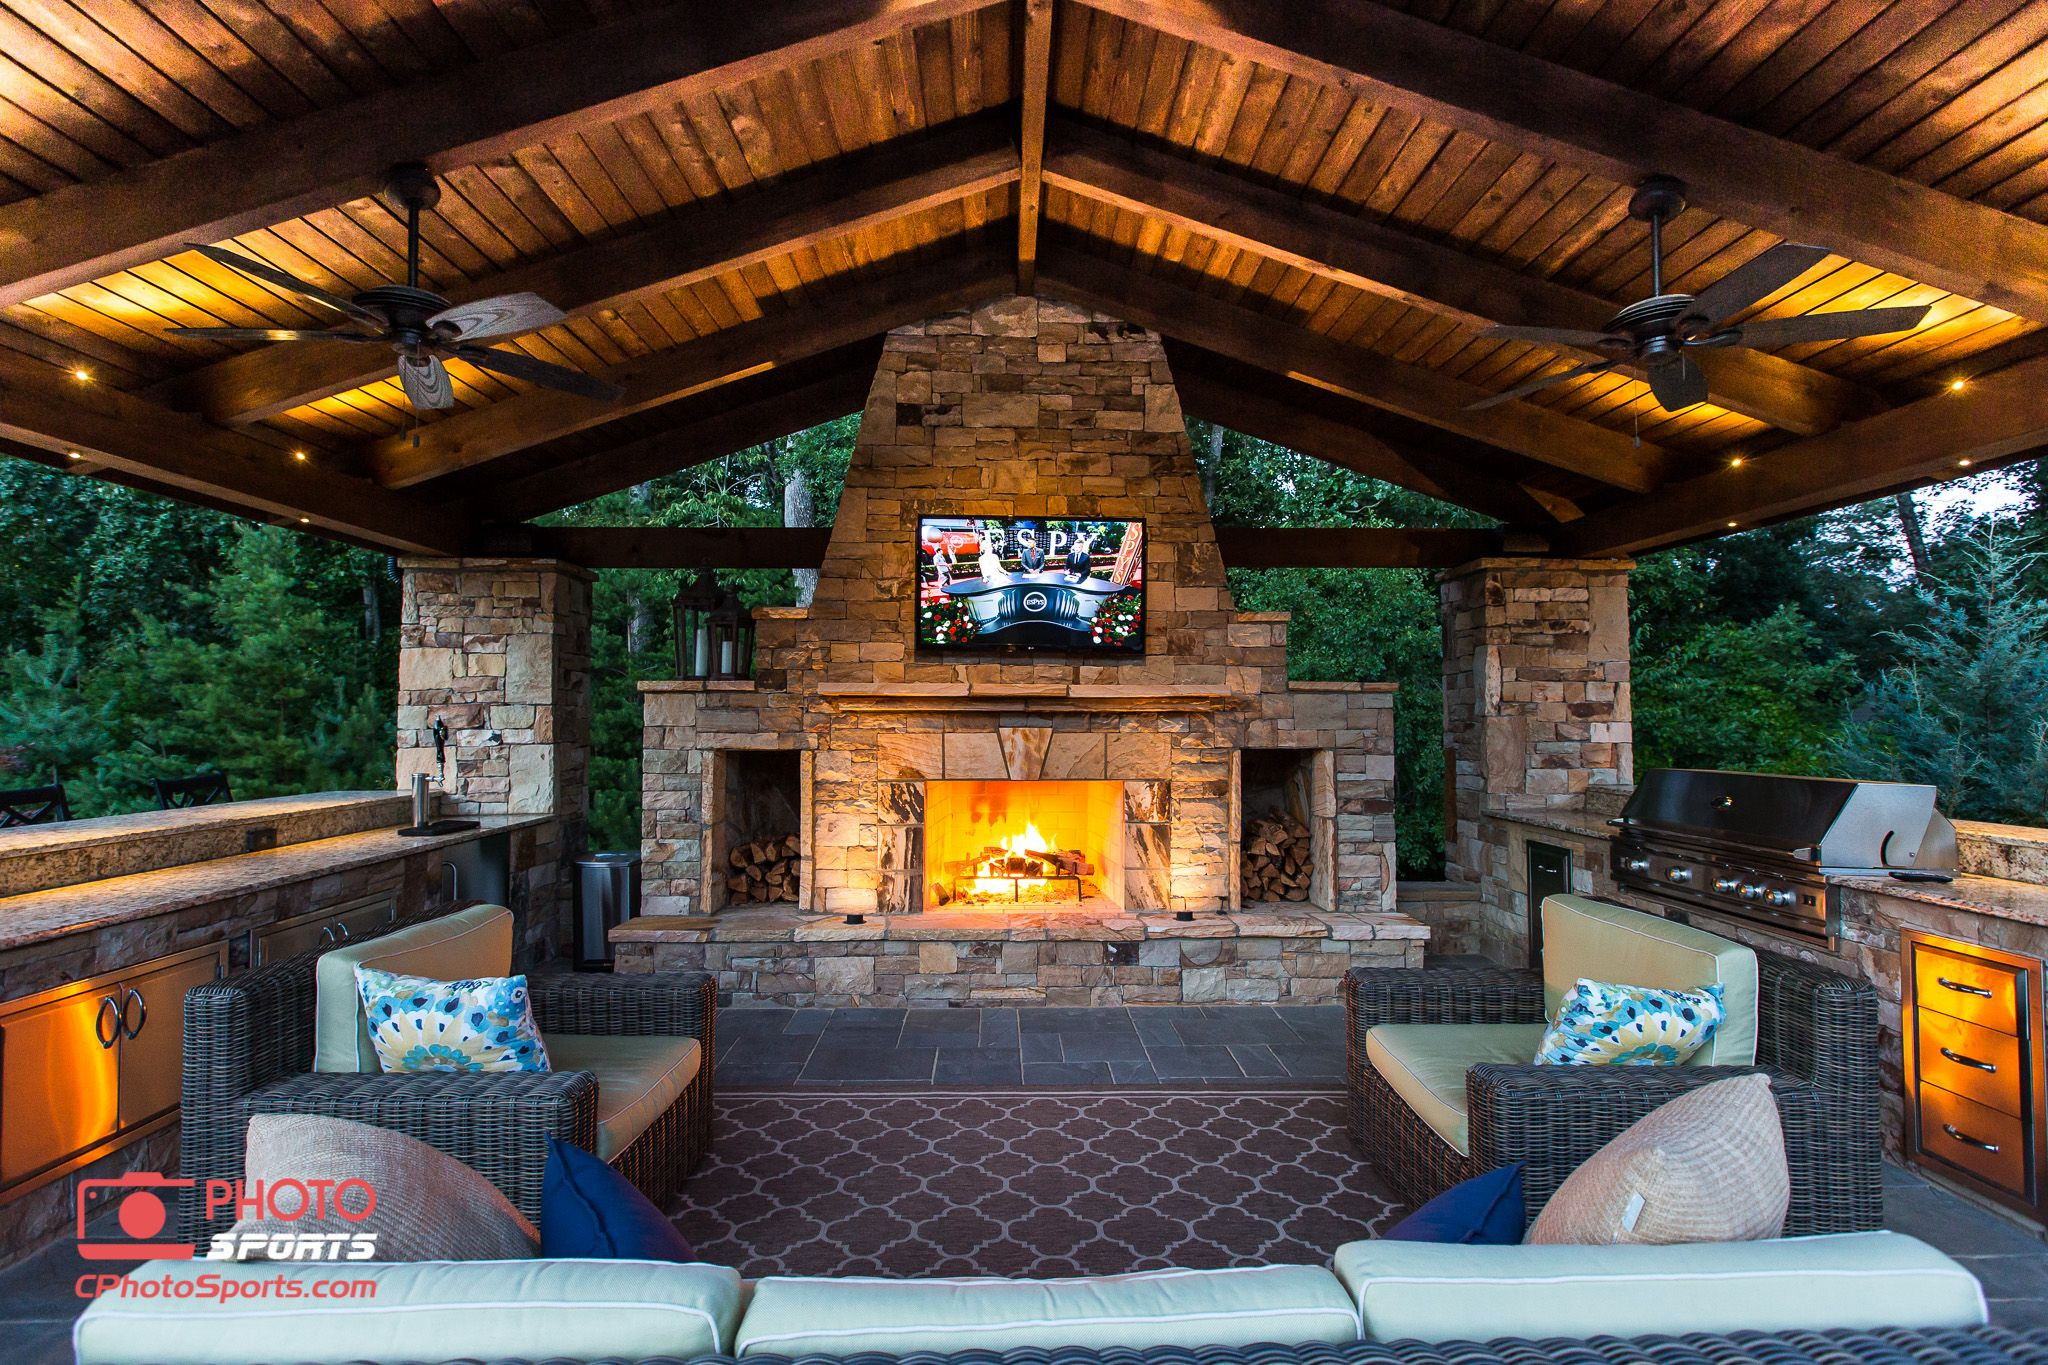 Outdoor Kitchen And Fireplace Ideas
 A pavilion with an outdoor kitchen fireplace and an